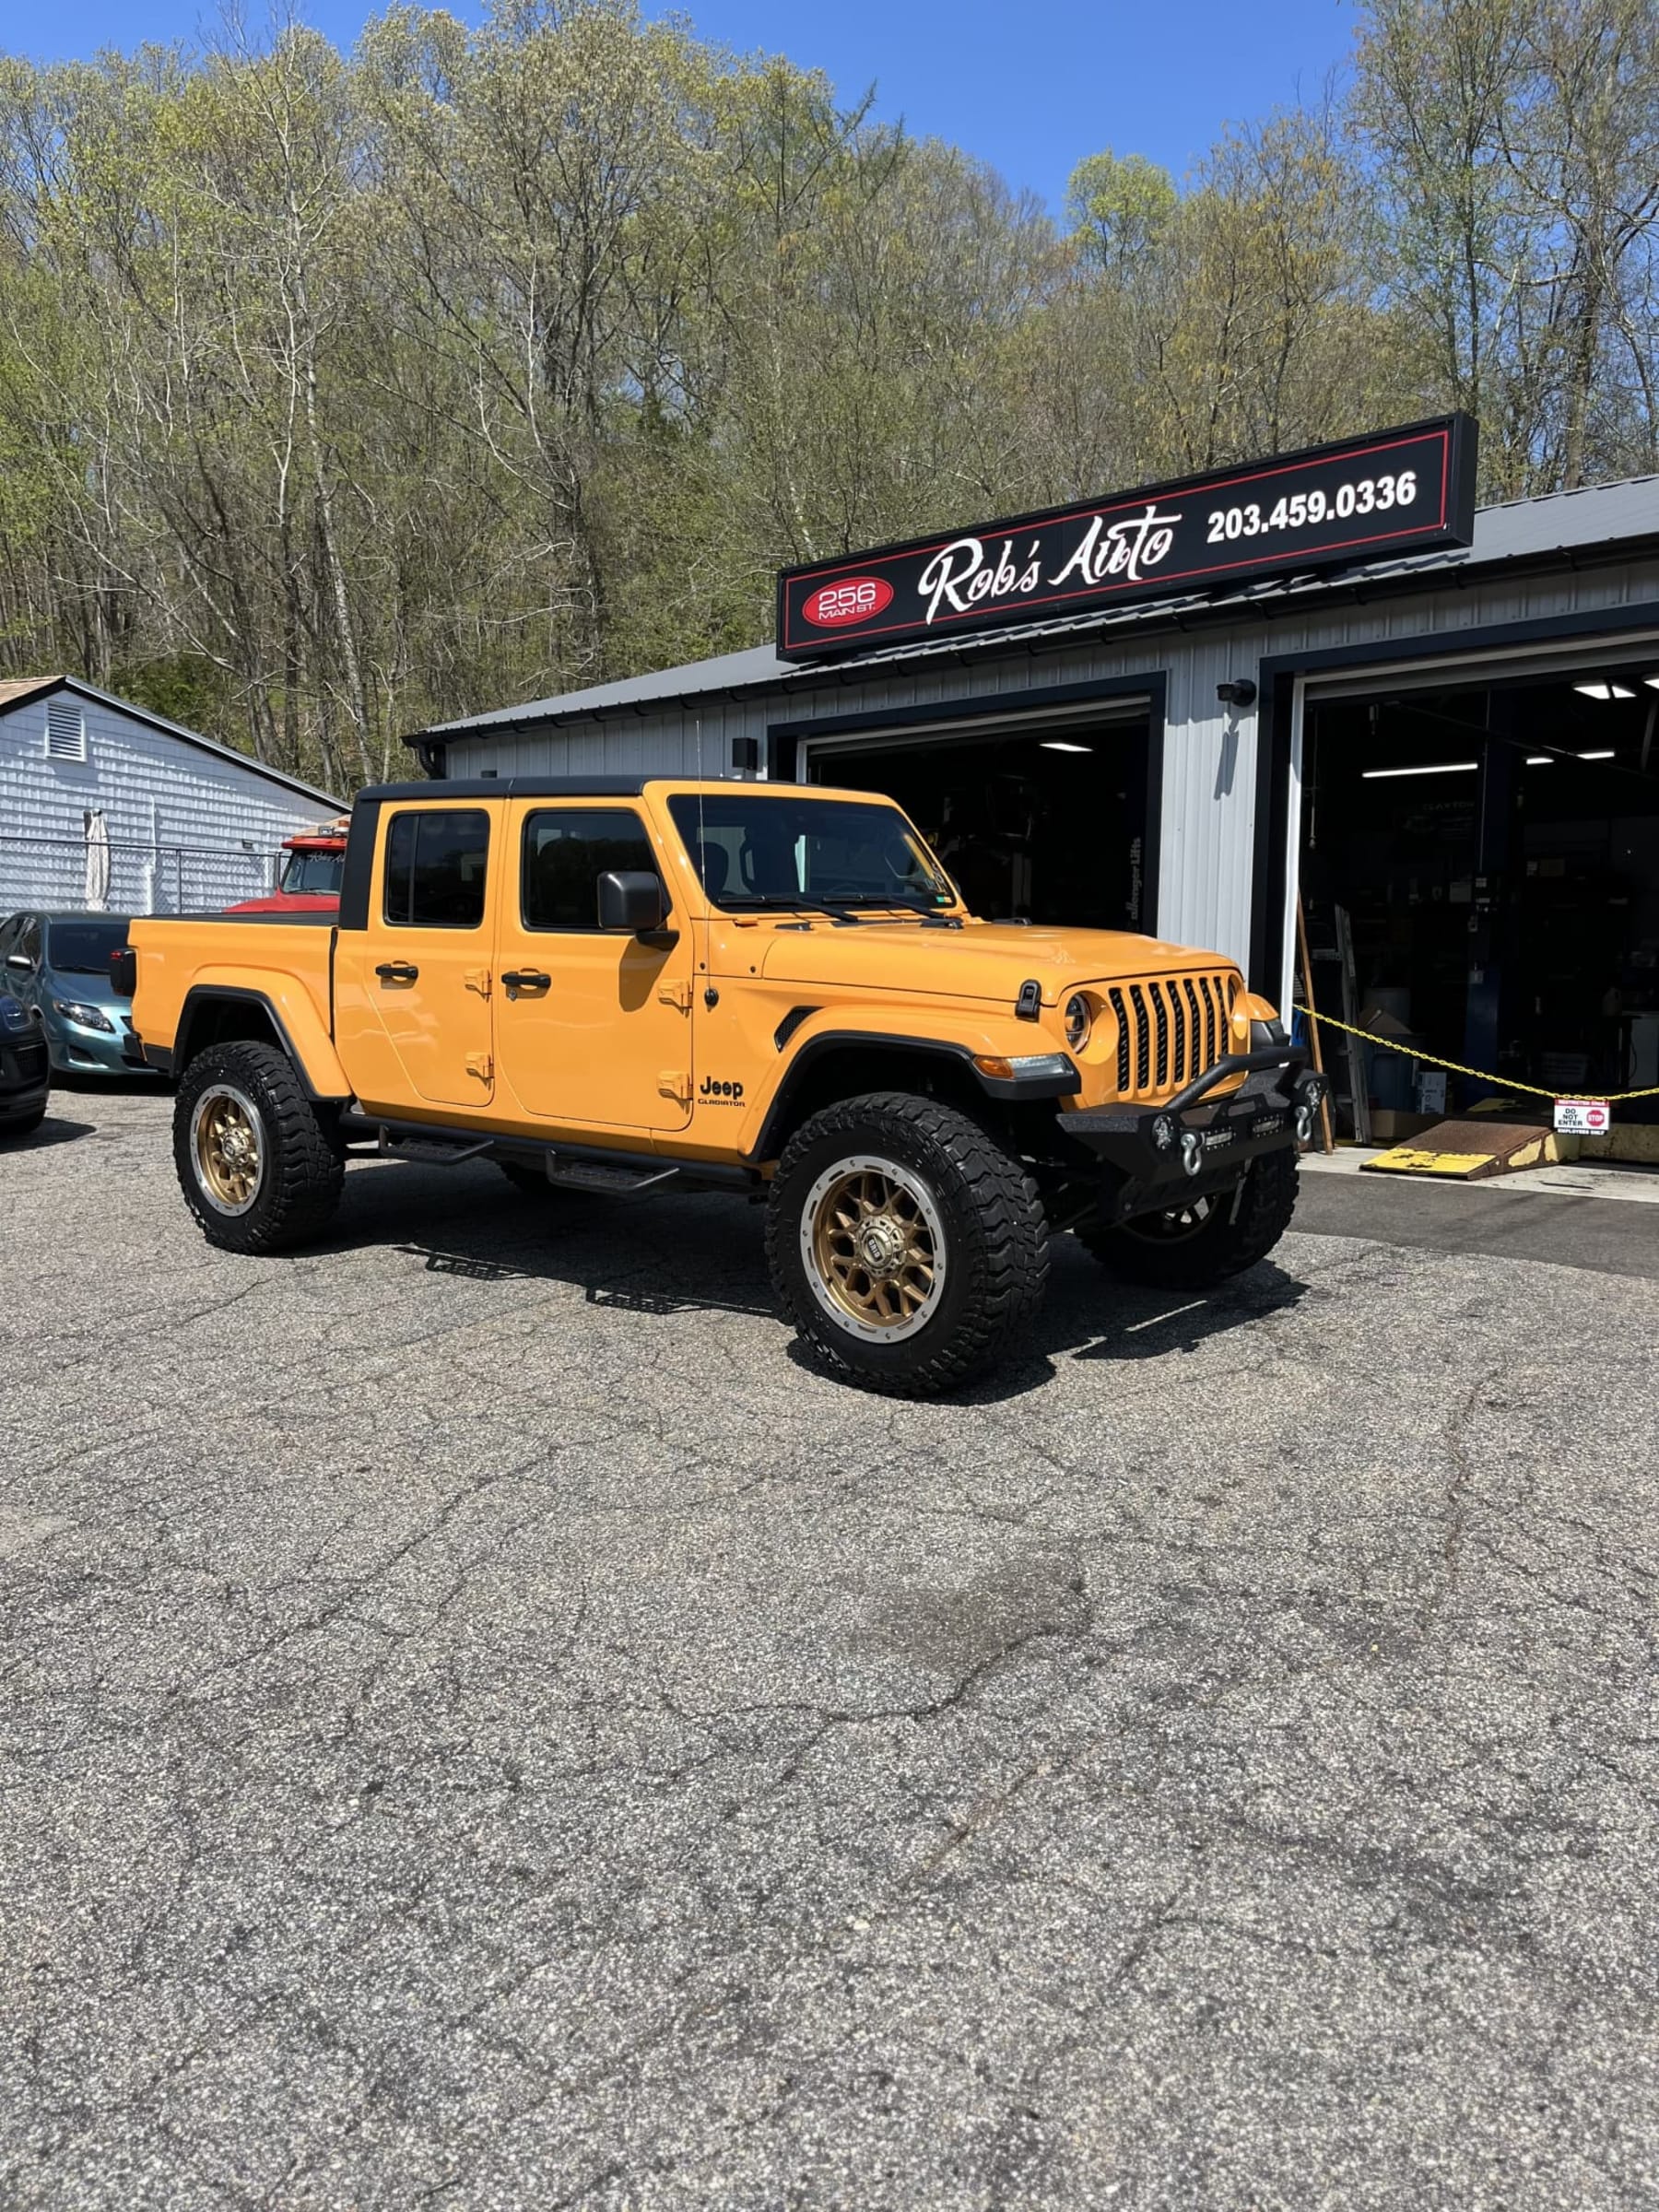 NEW ARRIVAL!! 2021 Jeep Gladiator Sport S!! Only 35,400 miles! One Owner Clean Carfax! This is a special order vehicle right from Jeep! Some key options include cold weather group, LED lighting package, 8.4 inch radio and premium auto group, active safety group, adaptive cruise control, auxiliary switch group, hardtop headliner, cold air intake system by Mopar, black stitched leather upgrade by Mopar, remote start and much much much  more! Had a window sticker of $58,390! Add a lift, wheels and tires, front and back bumpers and more it’s a steal at only $41,900!!!